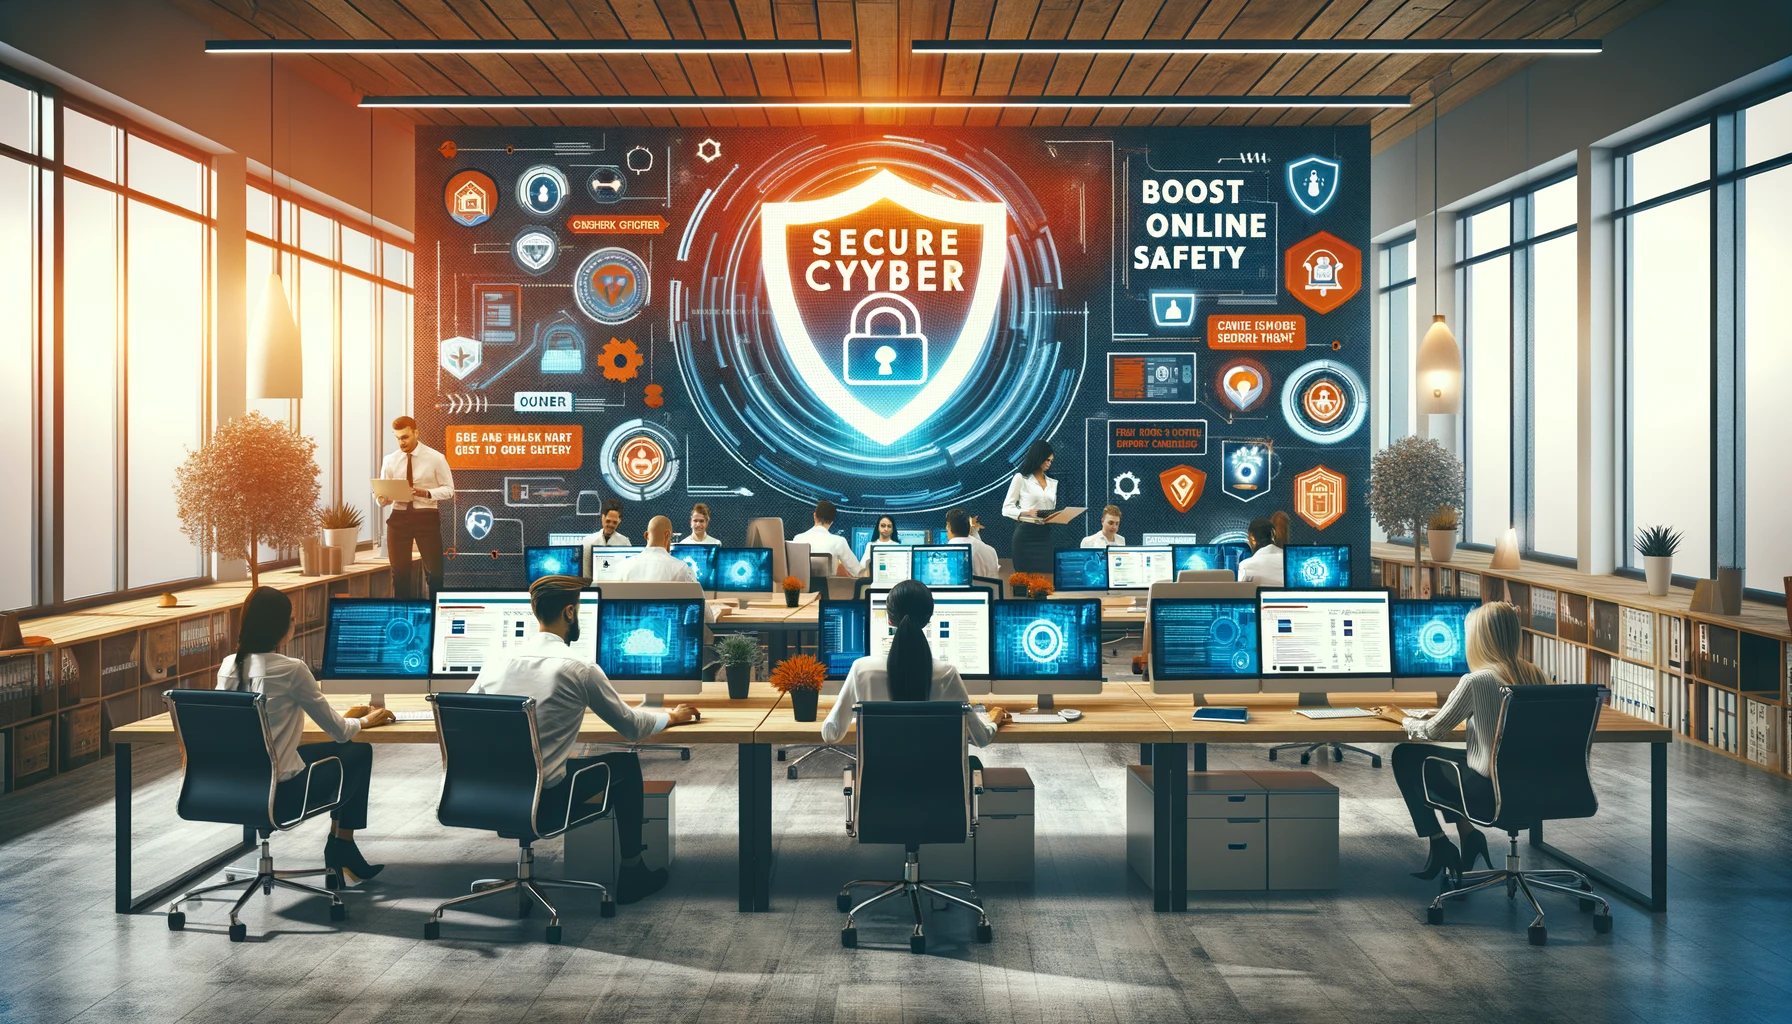 SecureCyber: Boost OnlineSafety in October